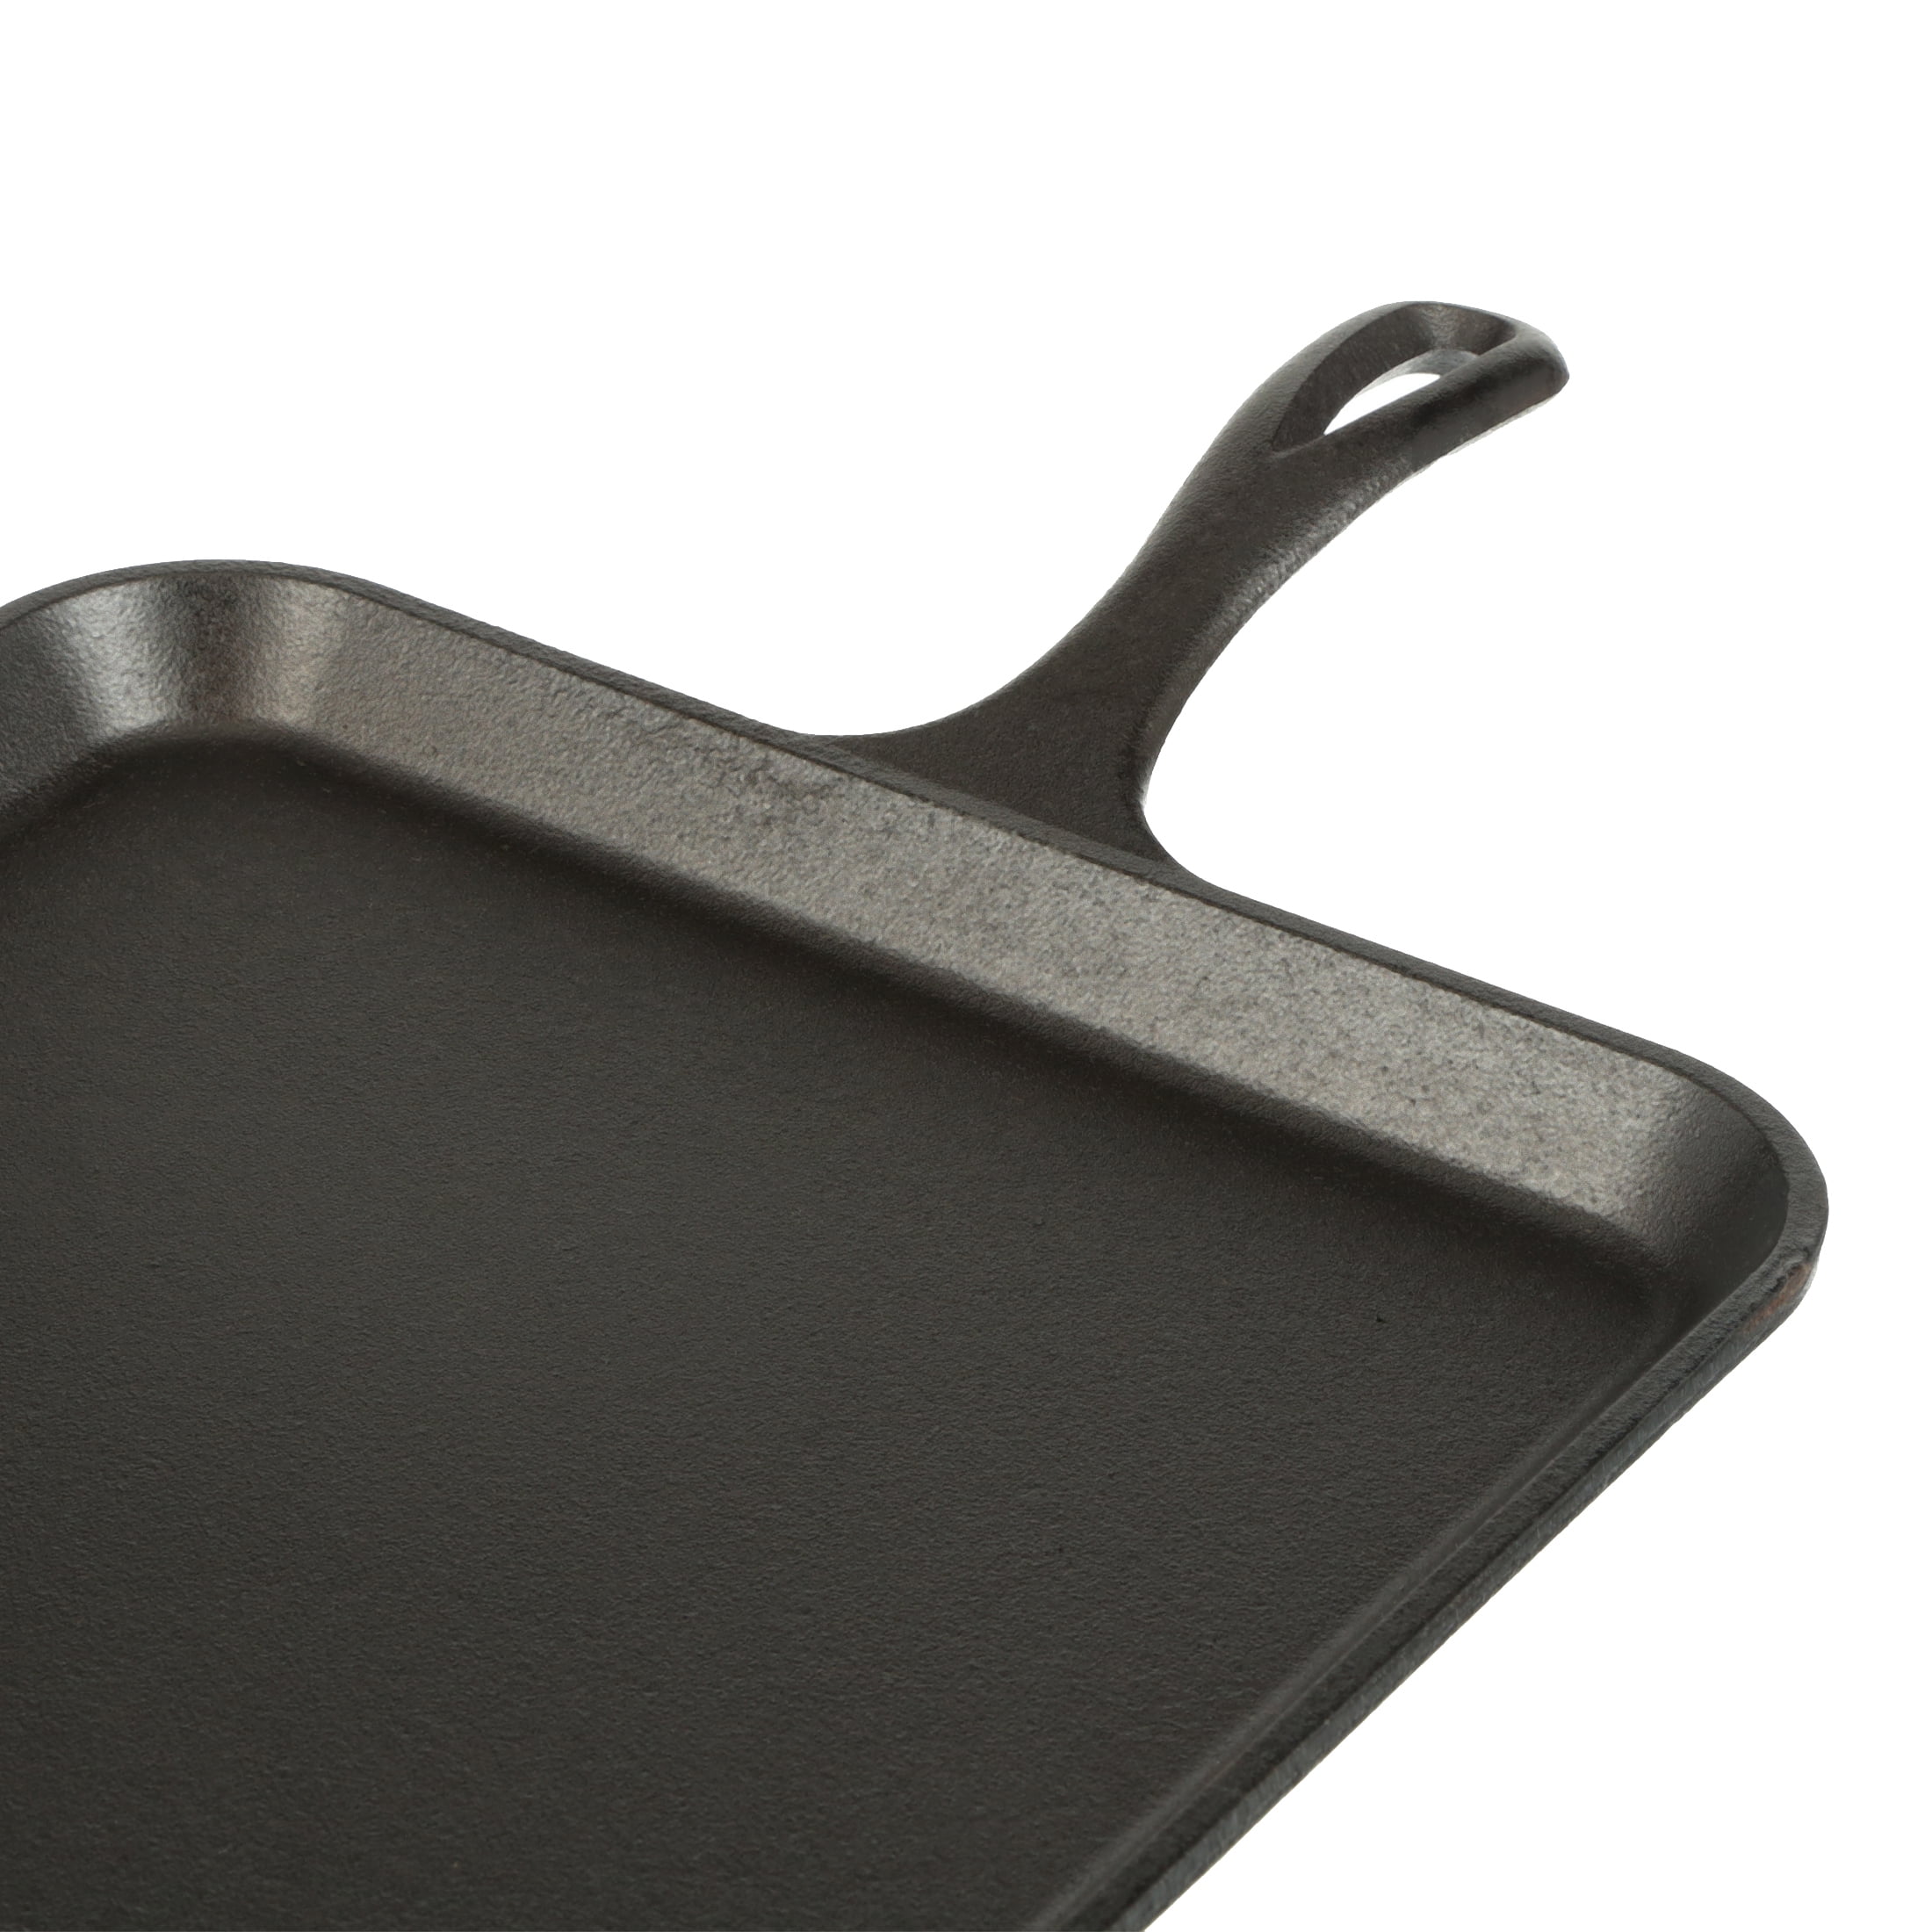 Lodge 11 Inch Square Griddle